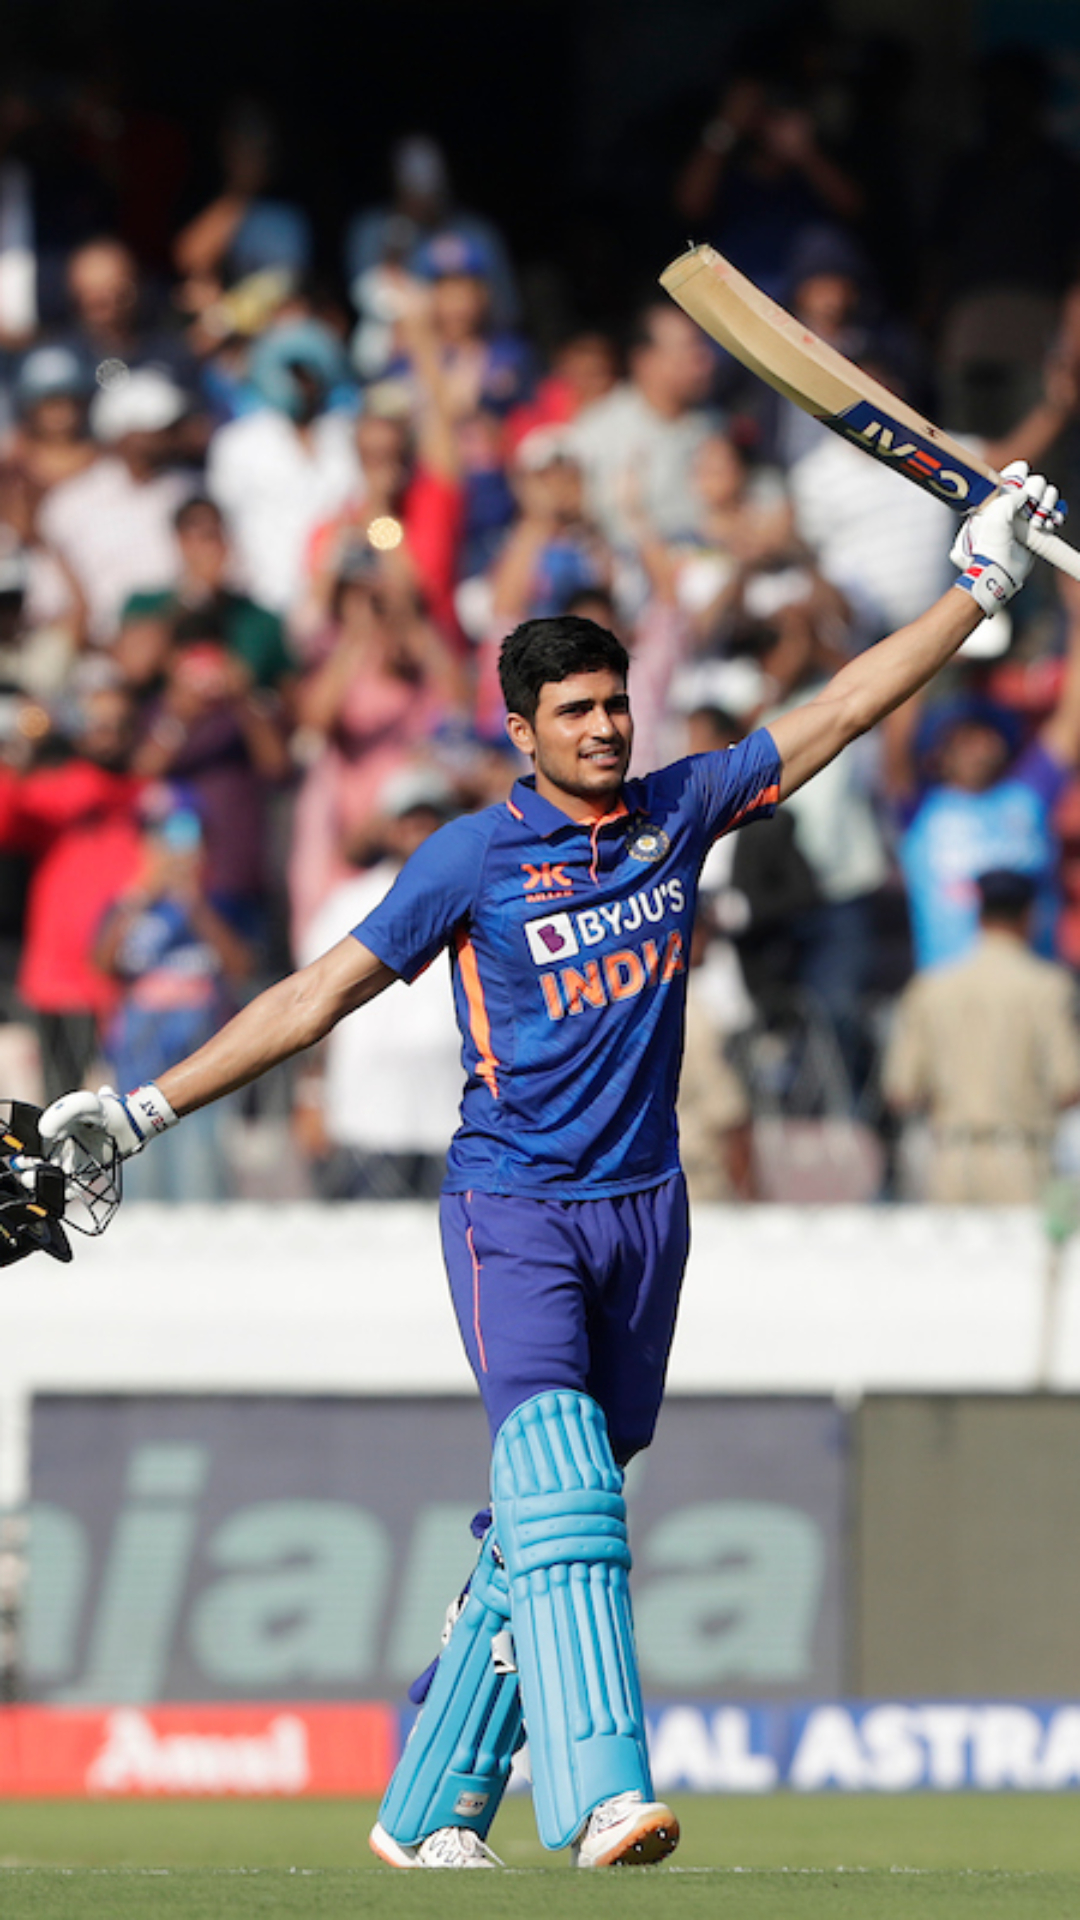 Shubman Gill becomes fastest Indian to score 1000 ODI runs, Here's list of top 10